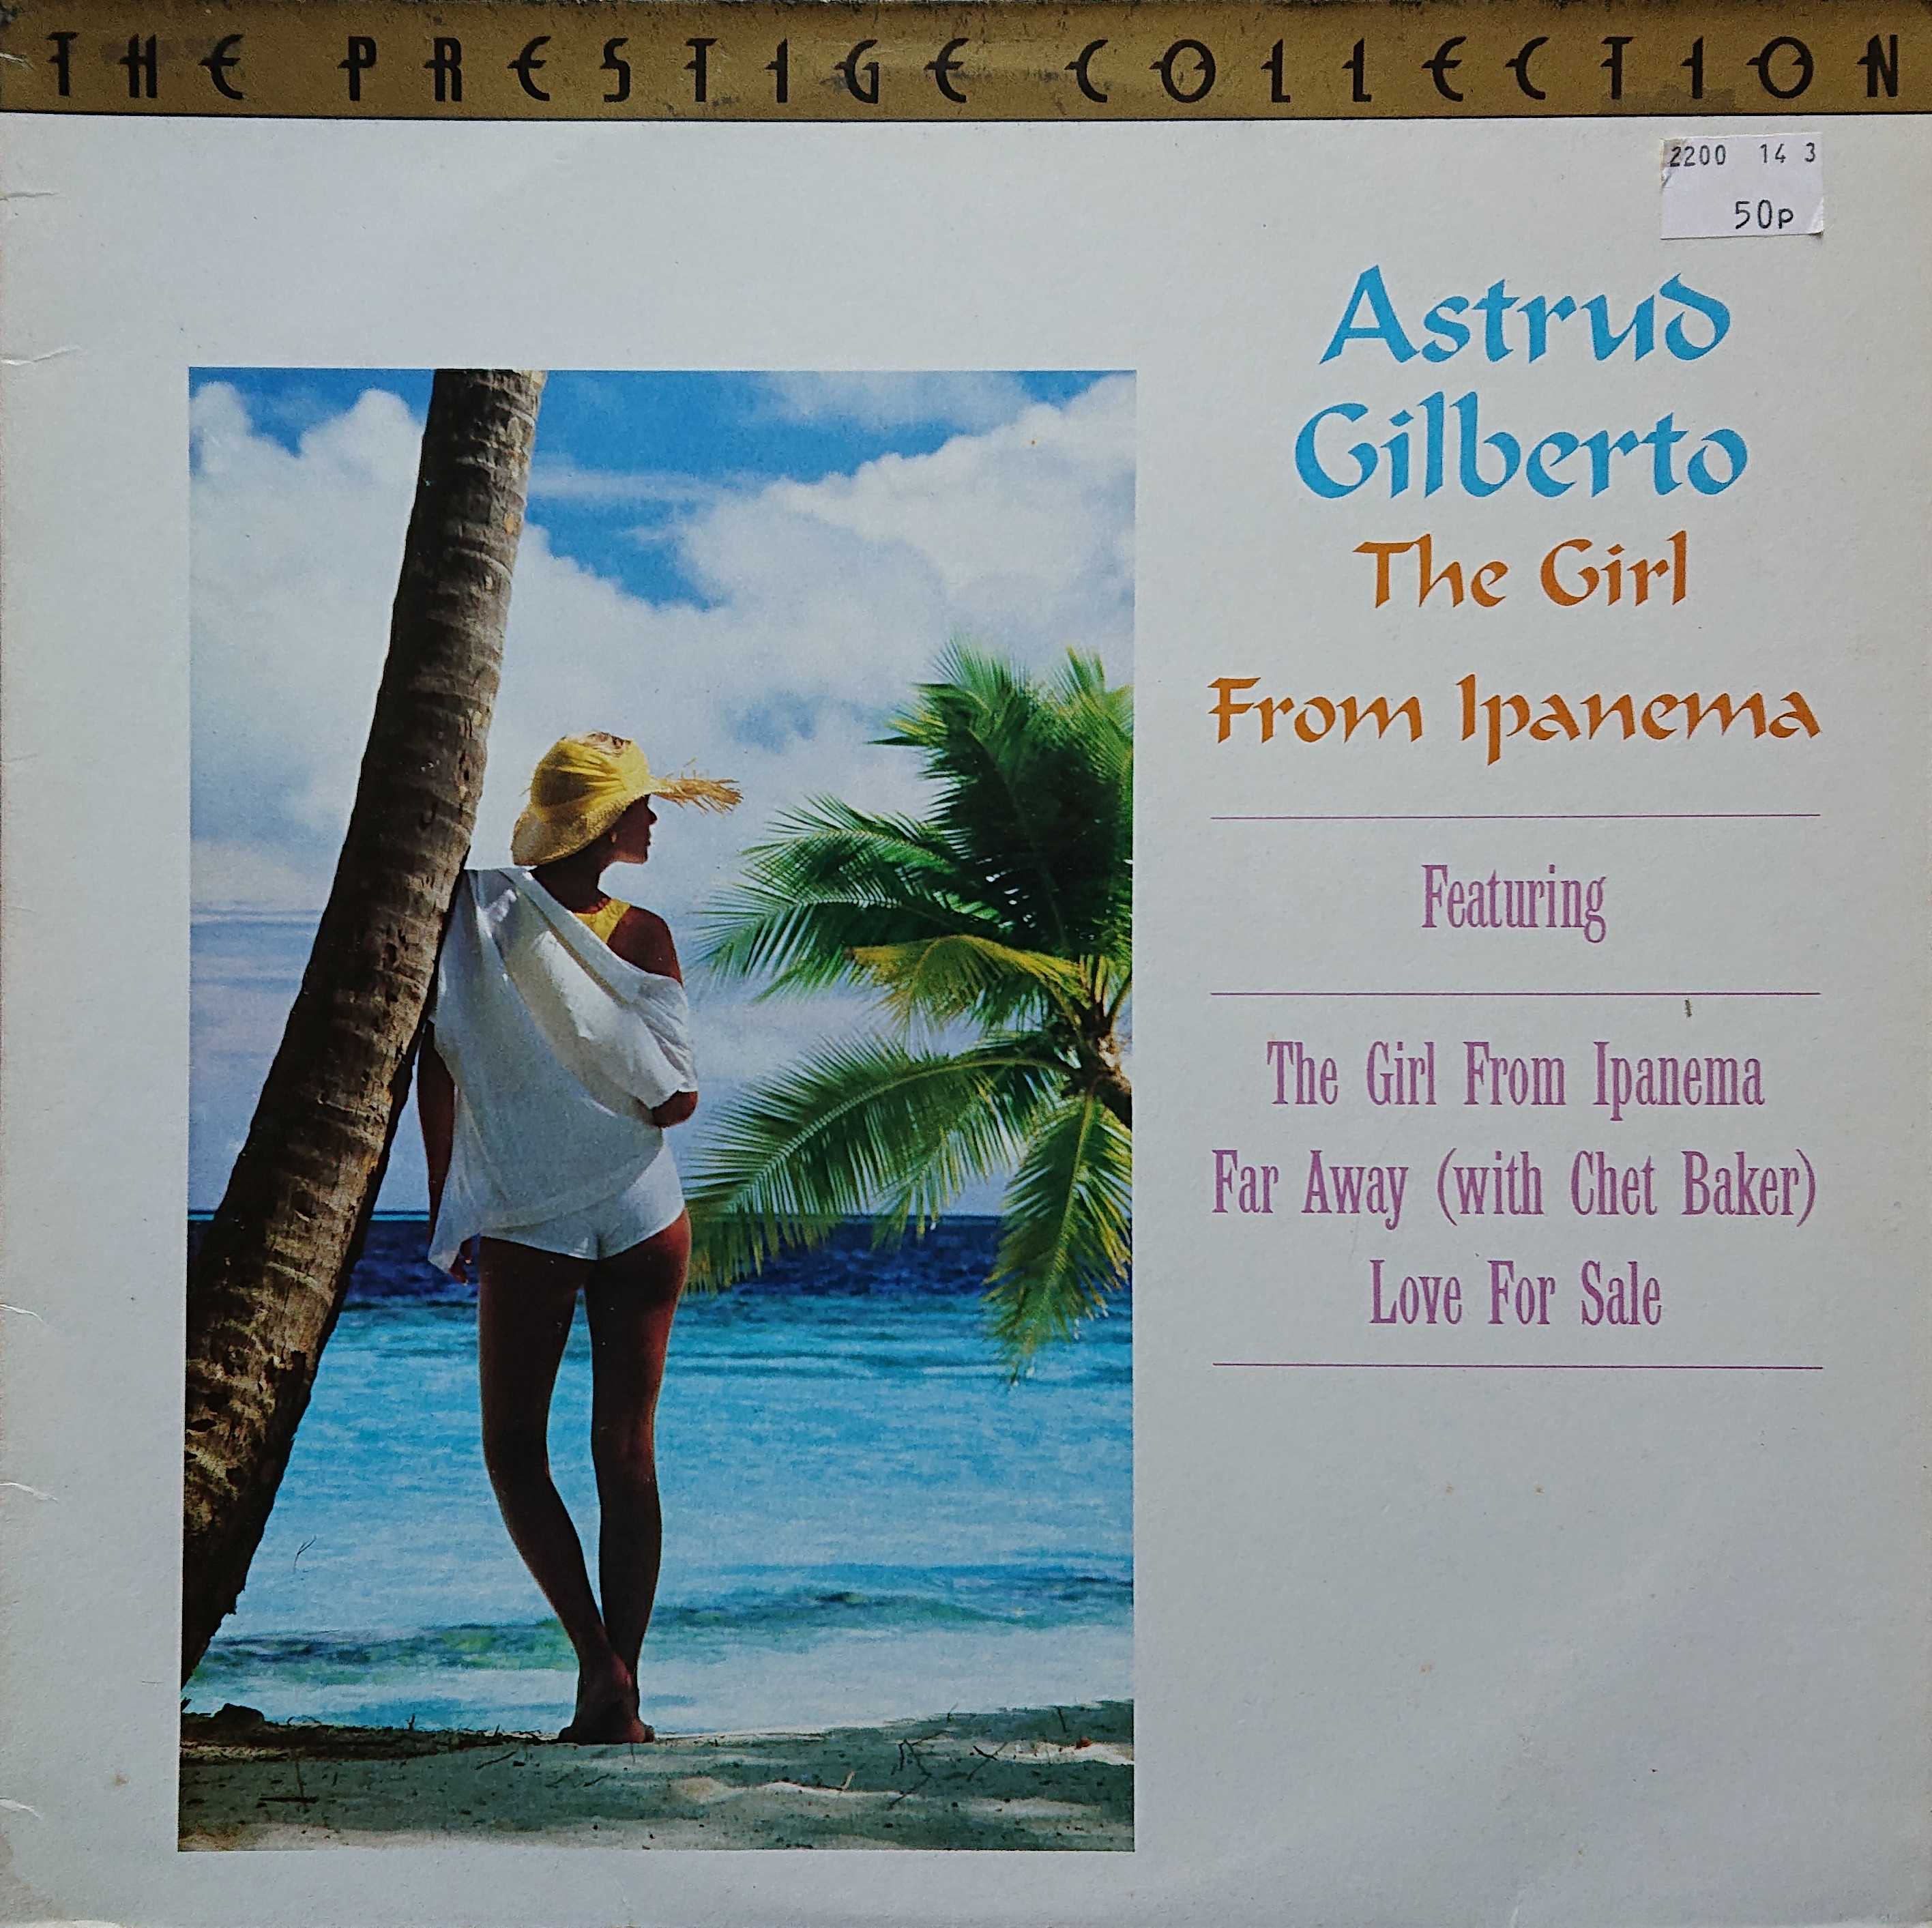 Picture of PREC 5009 The girl from Ipanema - Astrud Gilberto by artist Astrud Gilberto from the BBC albums - Records and Tapes library